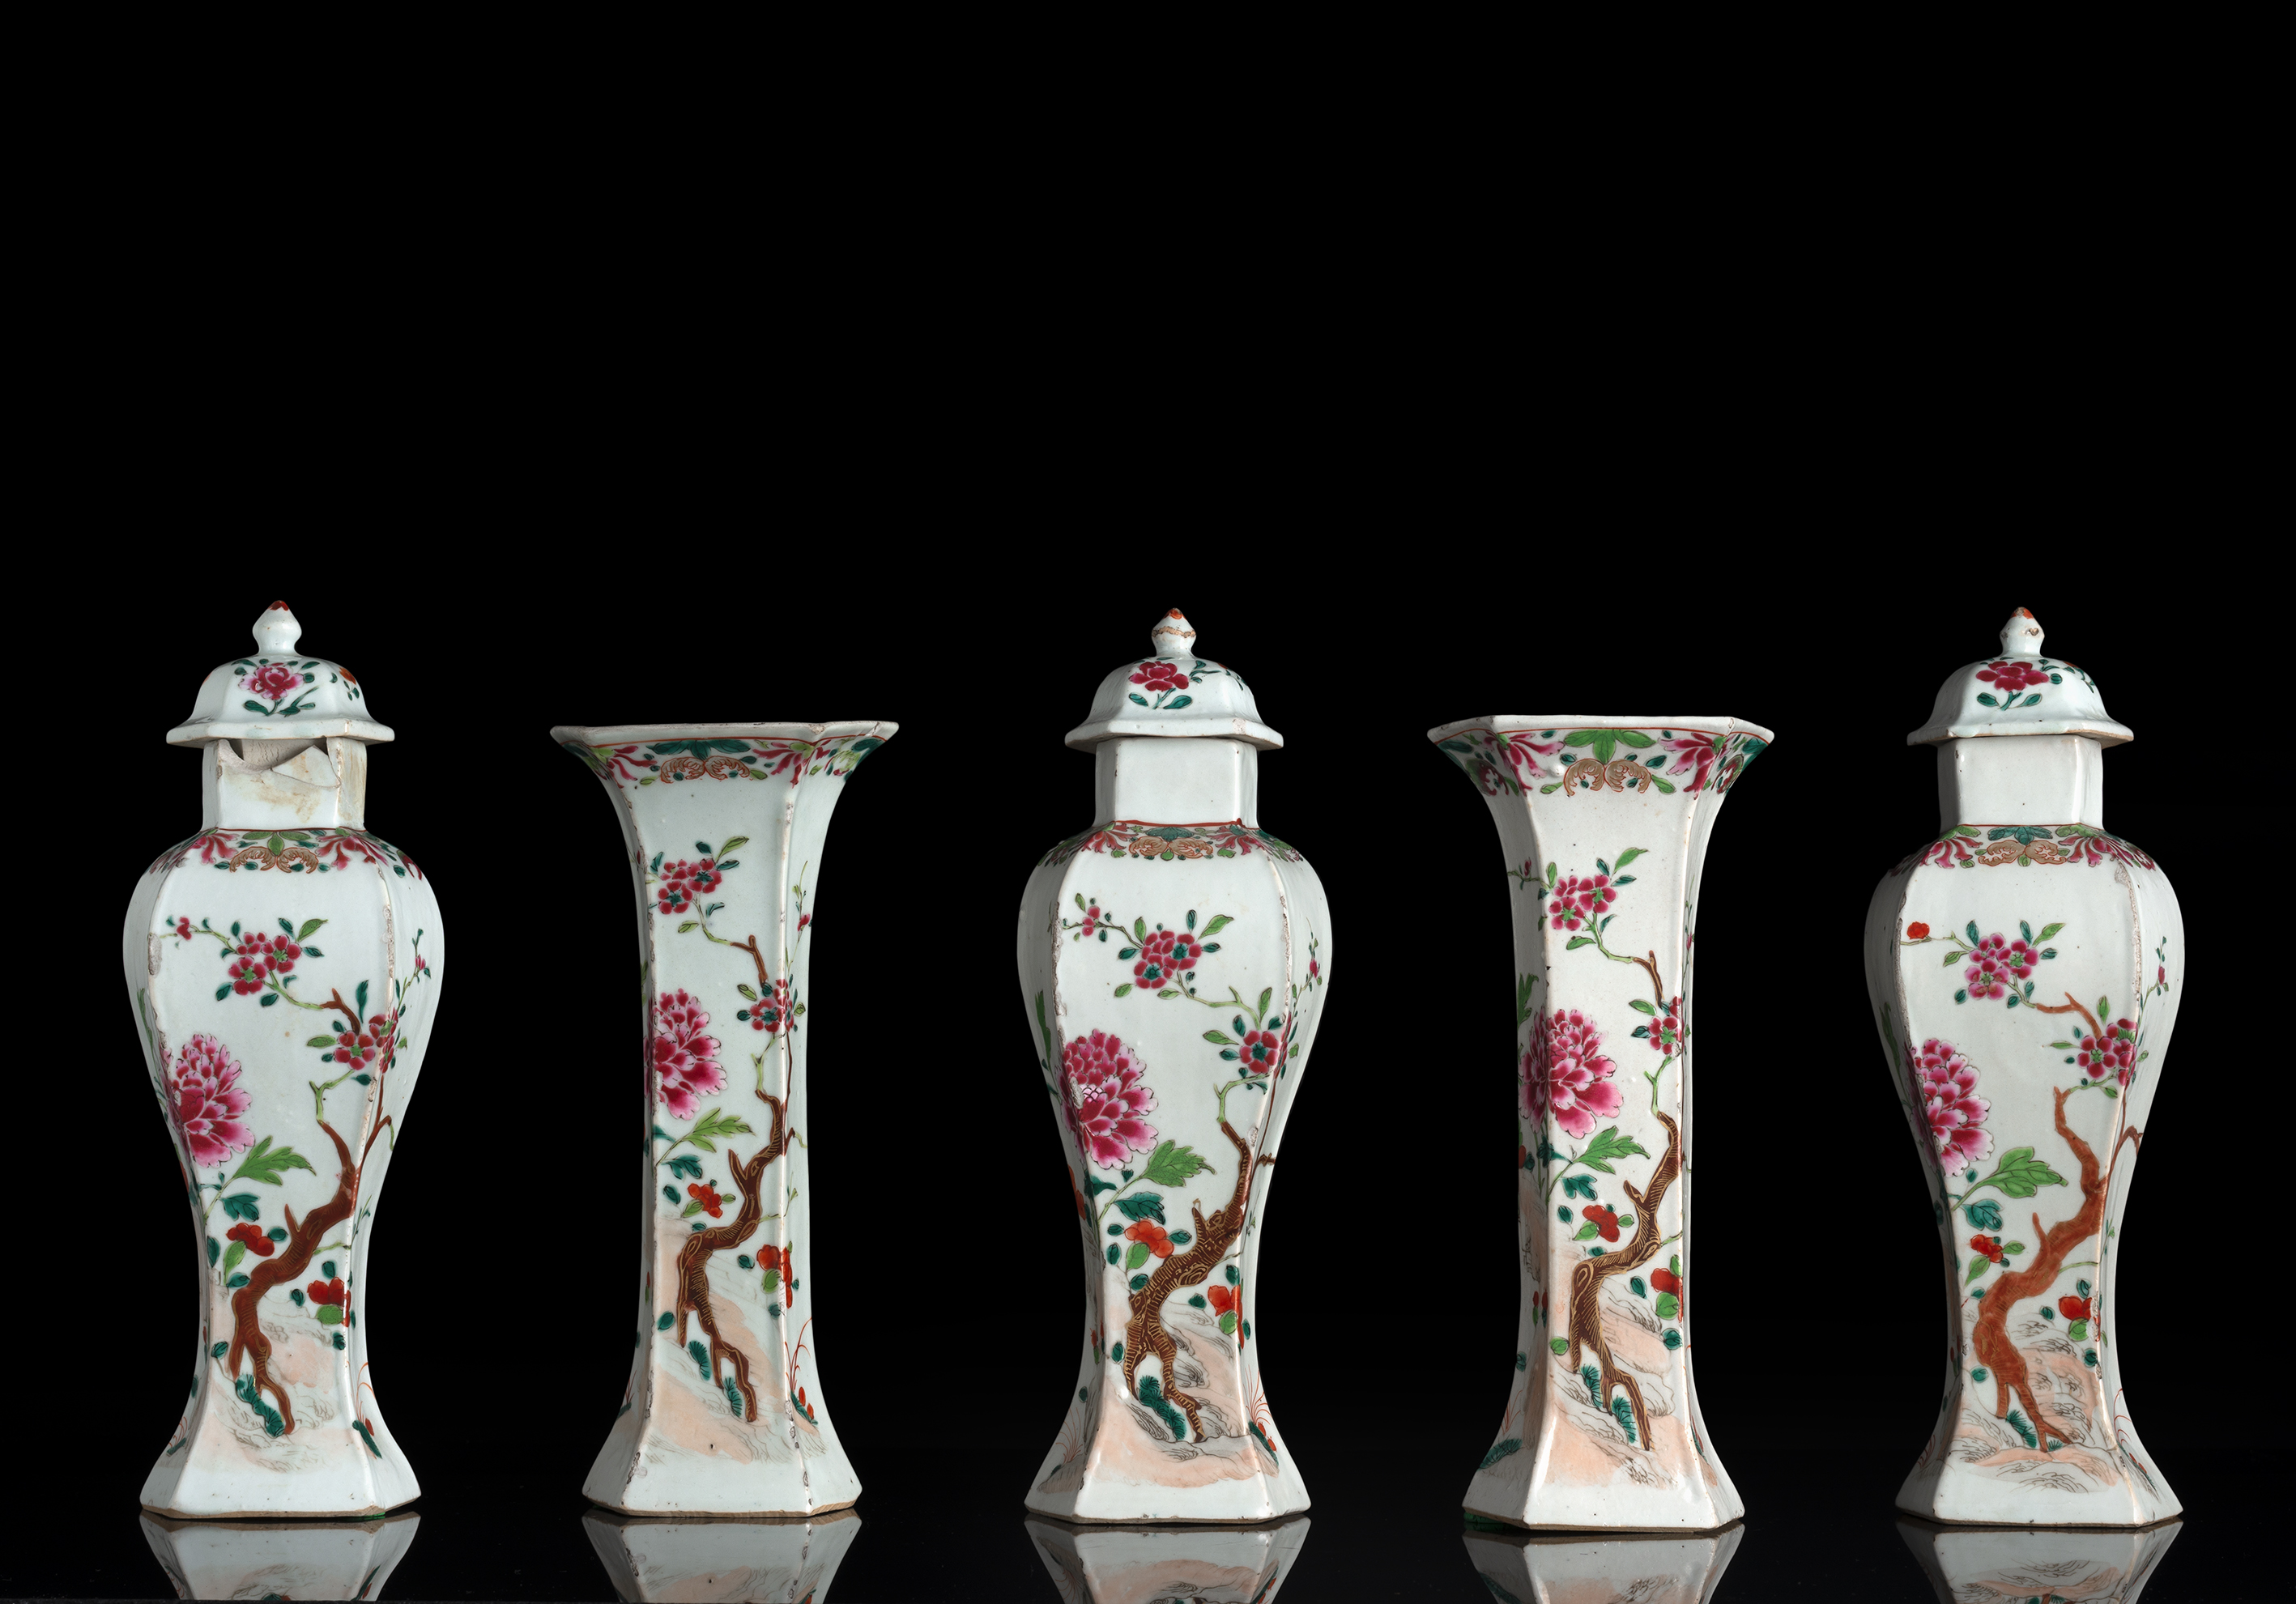 A FIVE-PART FAMILLE ROSE GARNITURE WITH TWO VASES AND THREE VASES AND COVERS